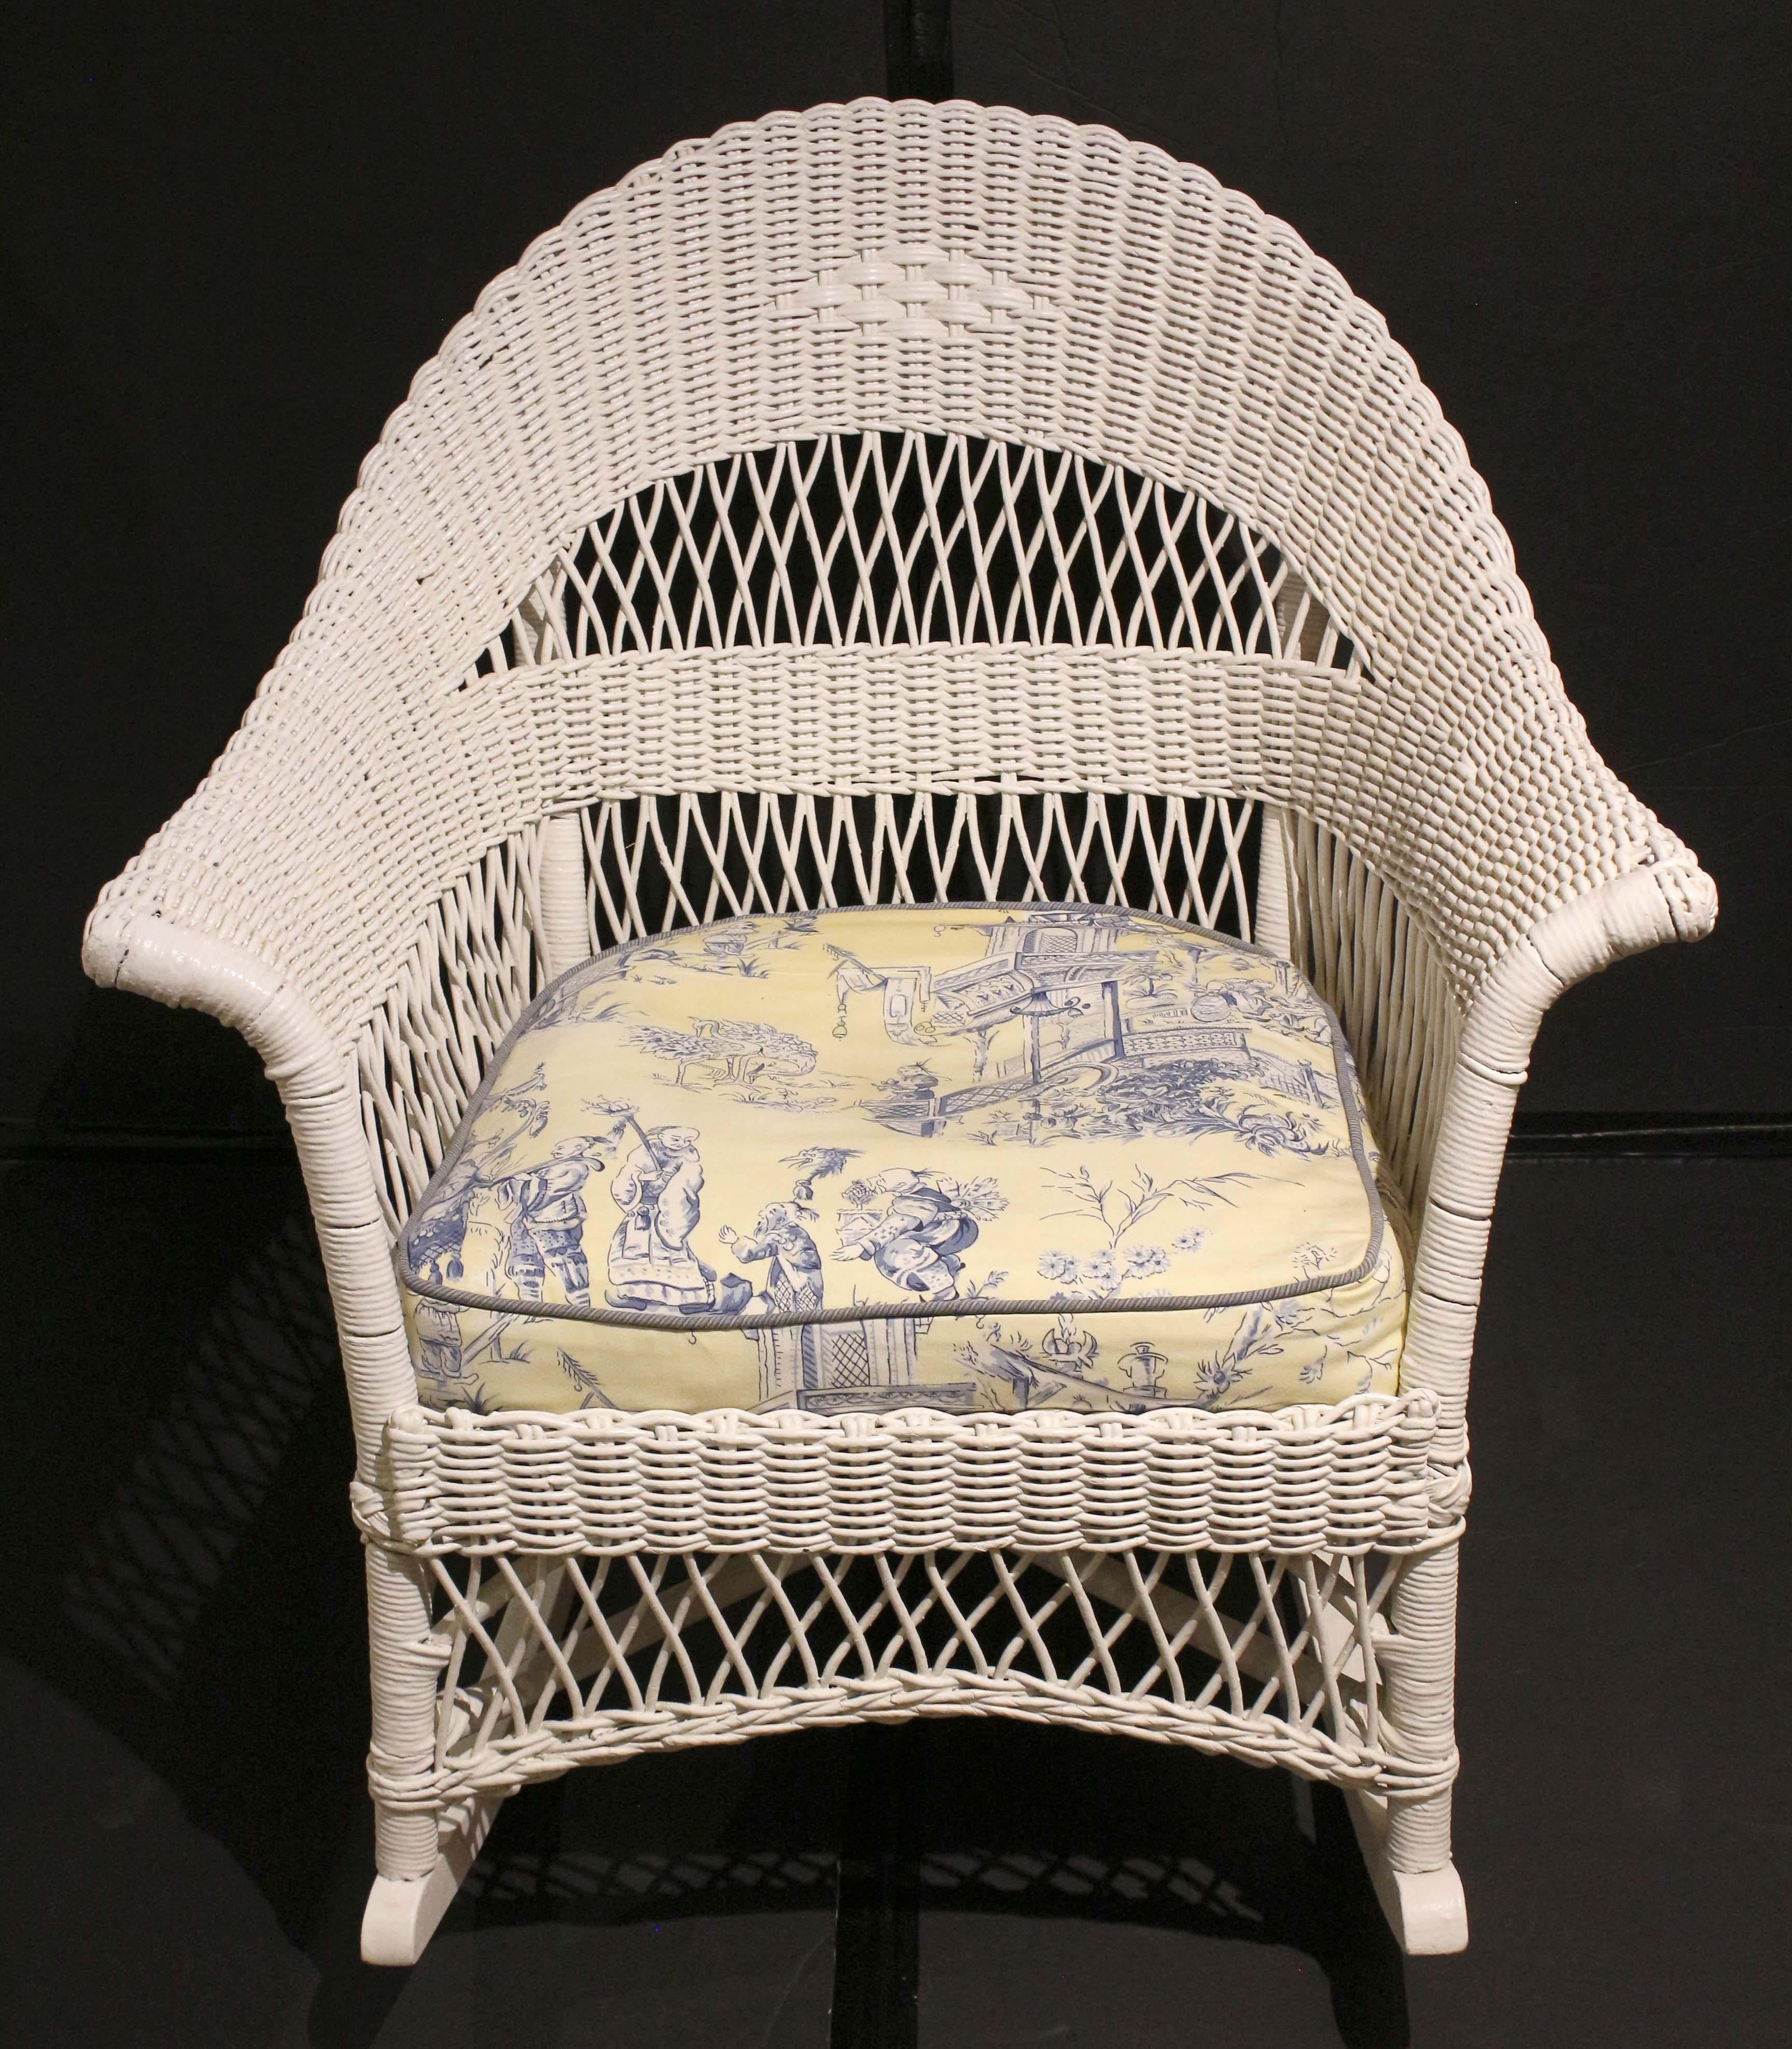 Early 20th century Heywood-Wakefield rocking chair. Close woven wicker in very fine repainted condition with custom toile cushion (used condition). Diamond reed design in the back. Wrapped arms.
30